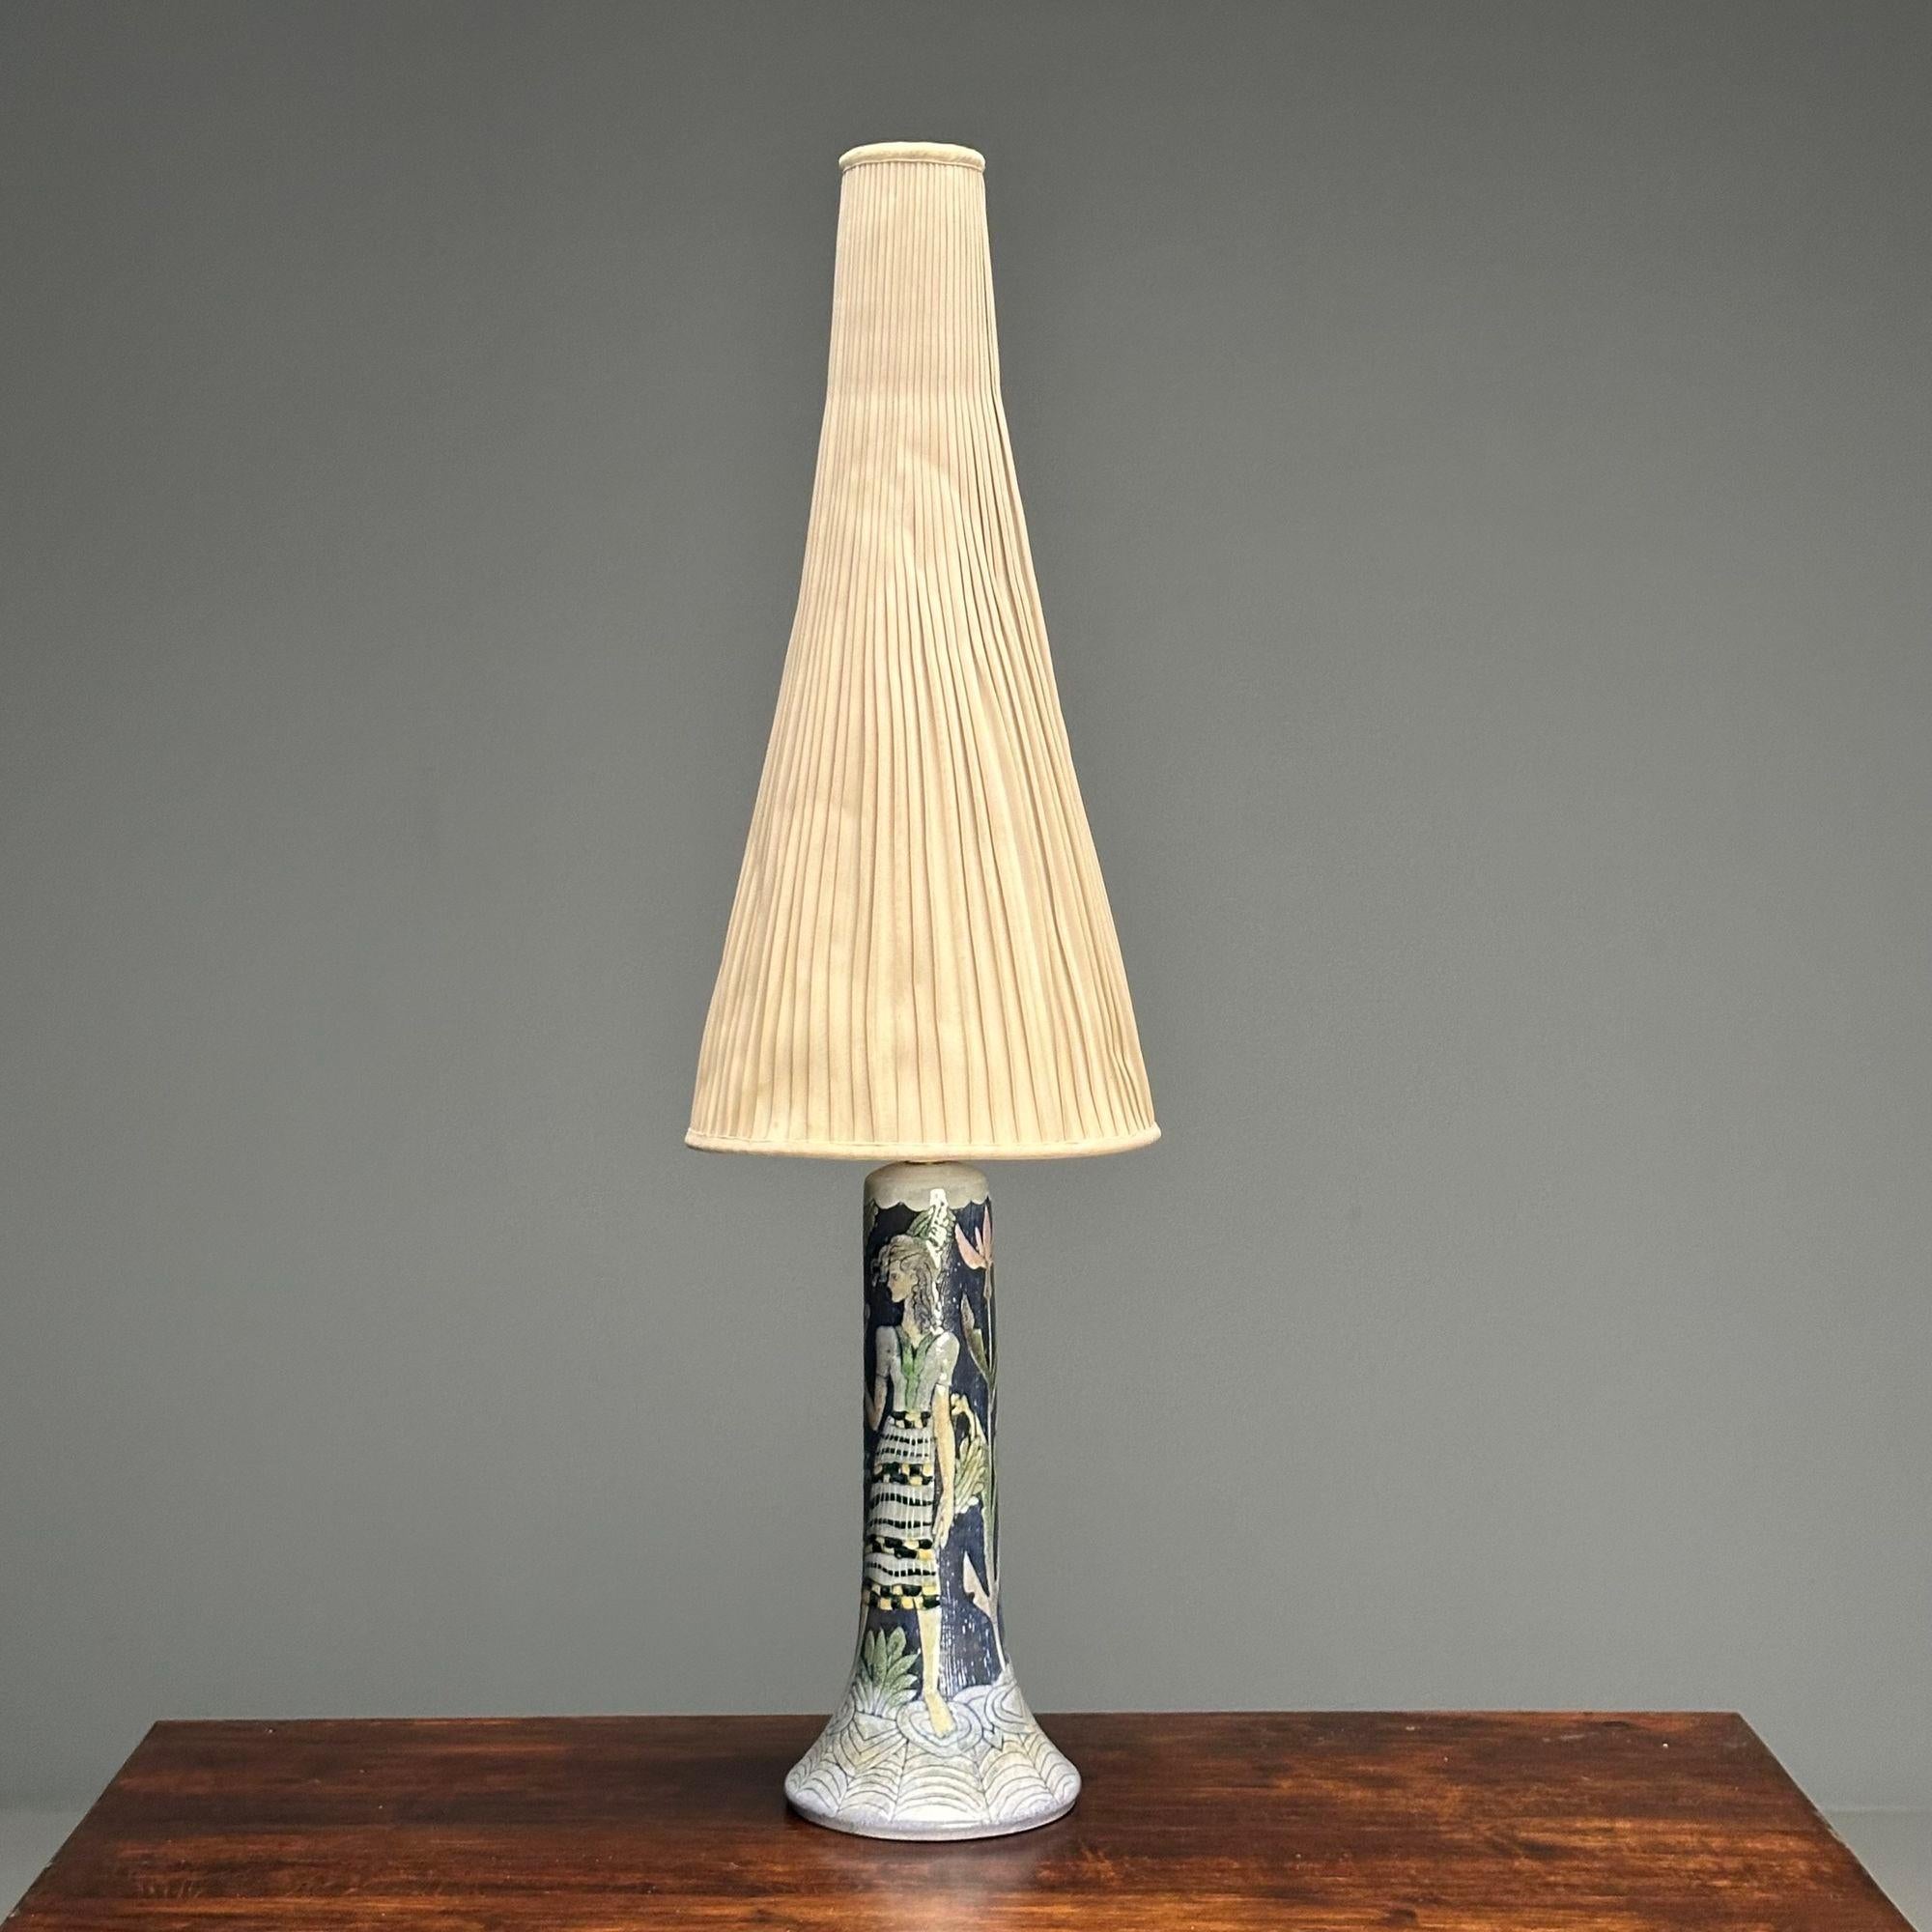 Marian Zawadzki, Tilgmans, Swedish Mid-Century Modern, Table Lamp, Ceramic, 1956


Swedish modern ceramic table lamp designed by Marian Zawadzki for Tilgmans in Sweden in 1956. this example features a tall glazed ceramic form decorated with